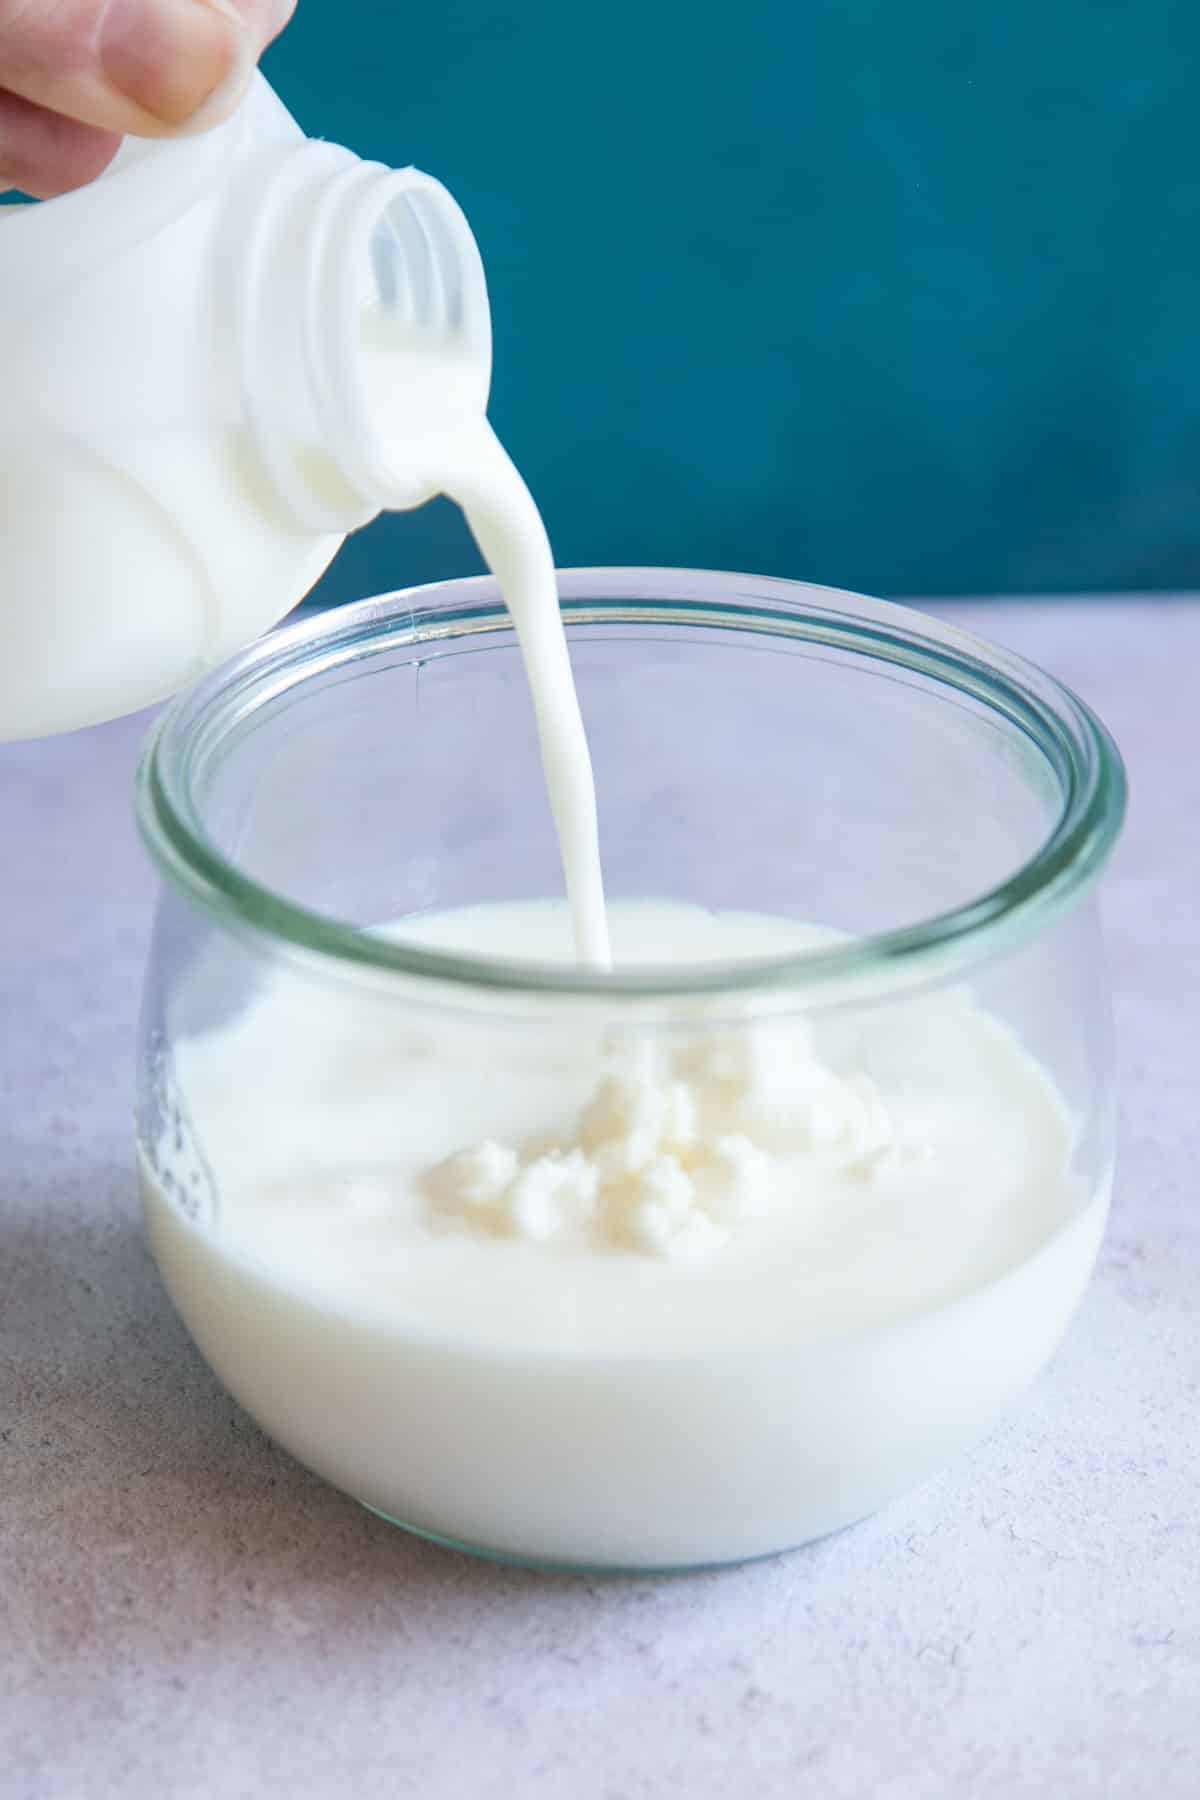 Storing kefir grains - milk is being poured into a jar of grains, prior to storage in the fridge.